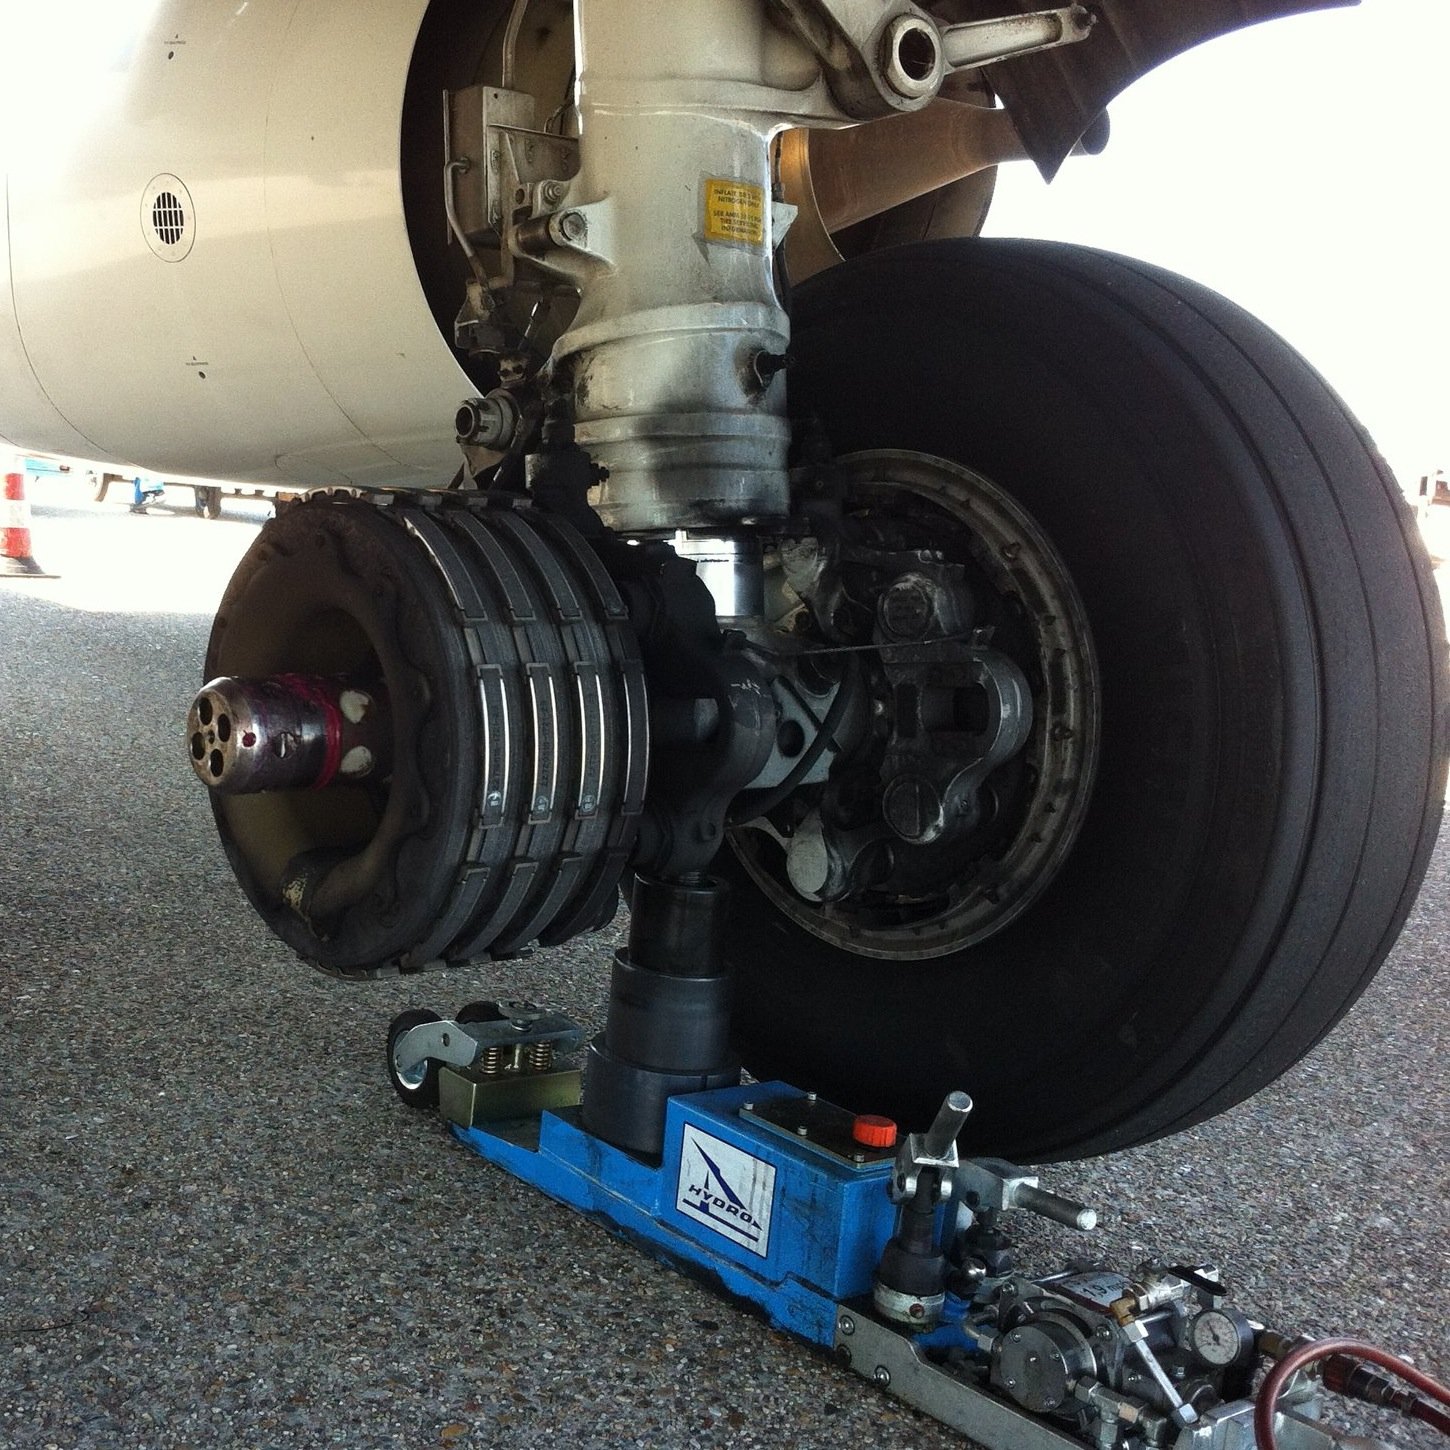 A brake assembly on a Boeing 737NG main landing gear, visible after removal of one the wheels. Source: SKYbrary (Click image to enlarge)